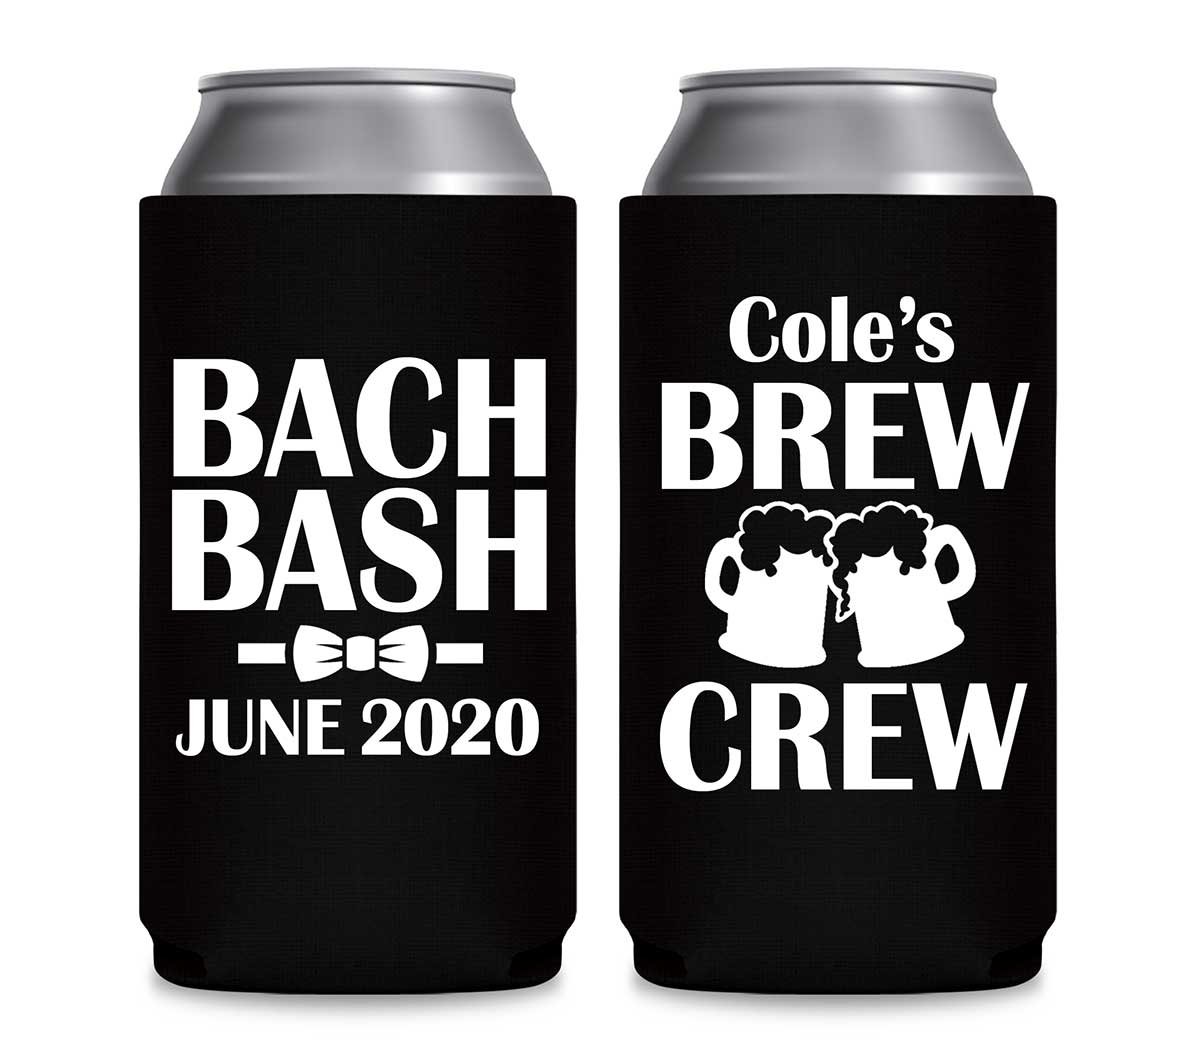 Brew Crew Bachelor Bash 1A Foldable 12 oz Slim Can Koozies Wedding Gifts for Guests